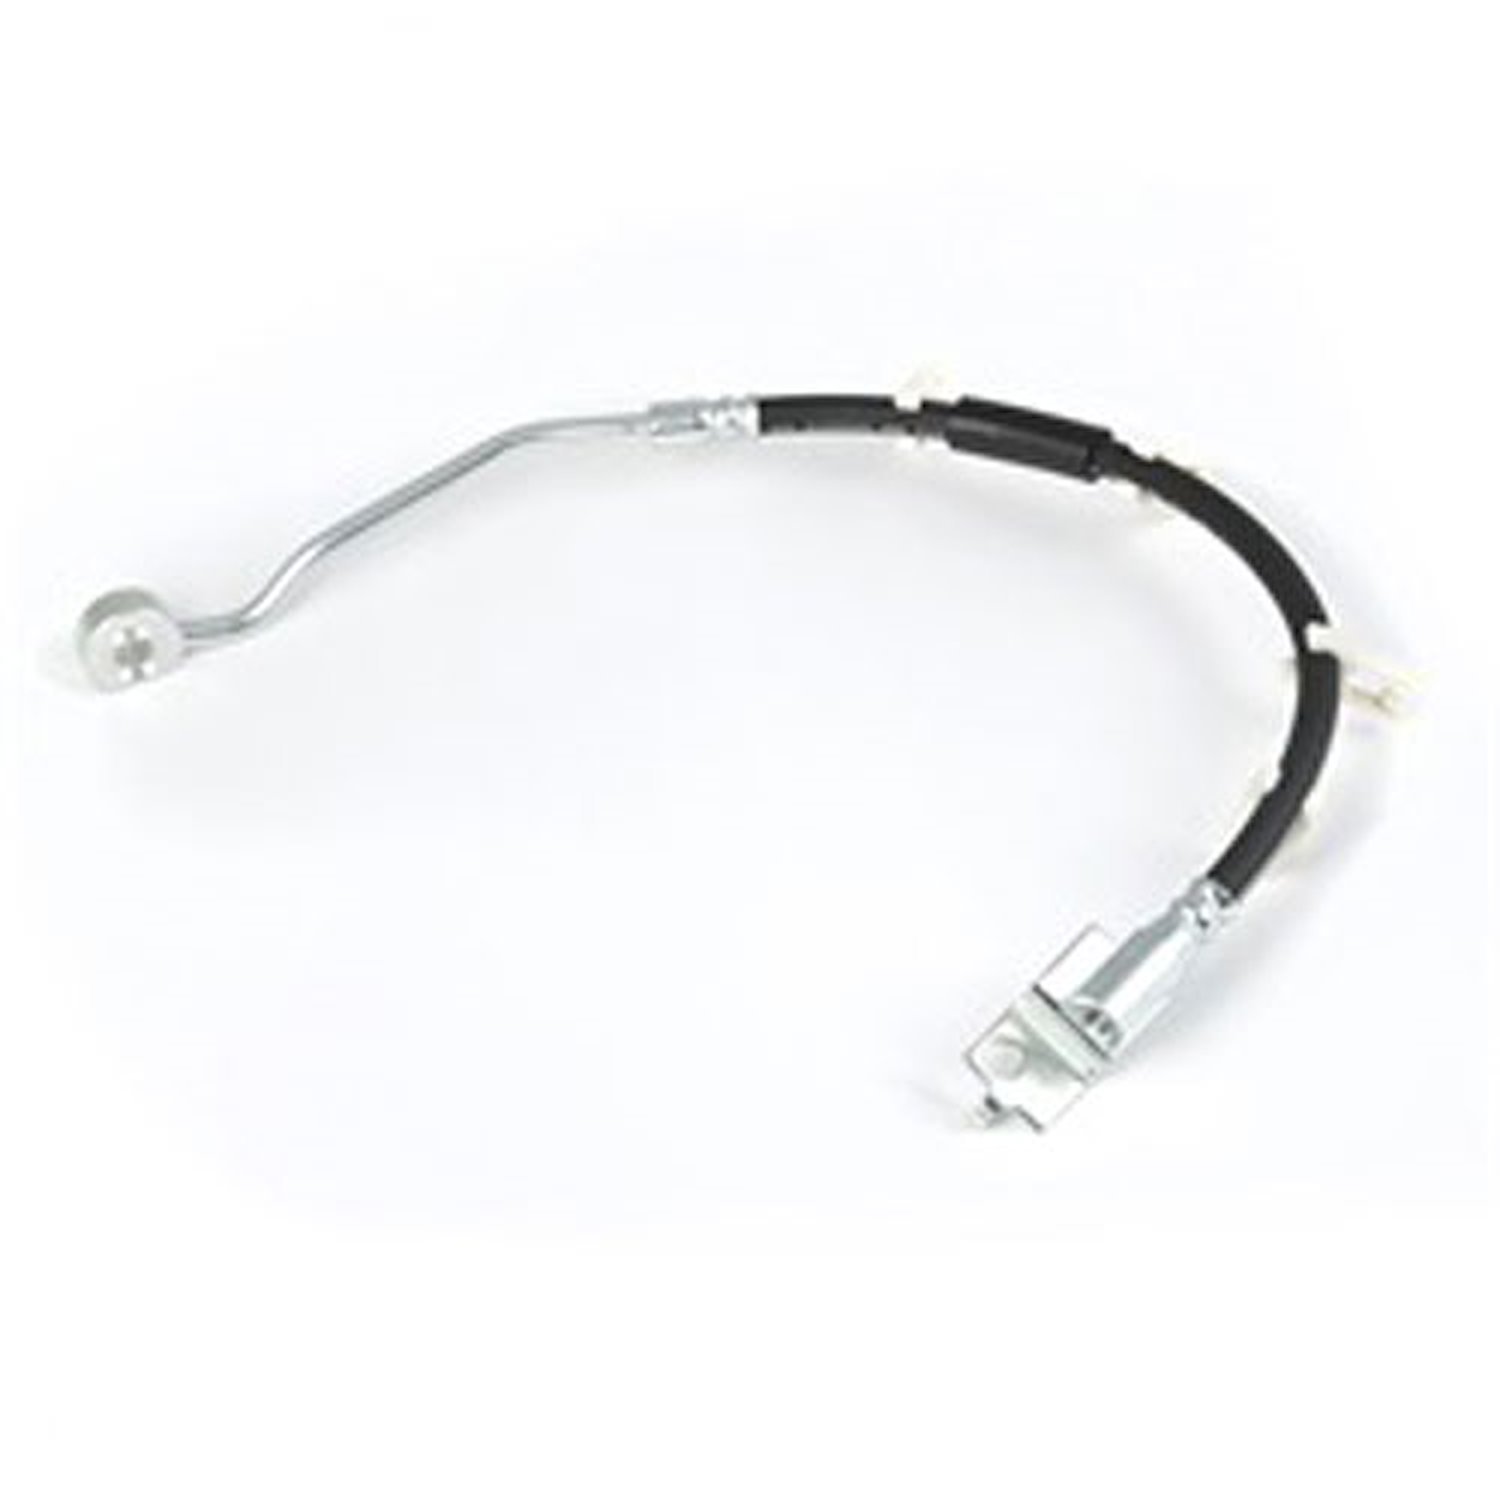 This left front brake hose from Omix-ADA fits 94-95 Jeep Wranglers with ABS disc brakes.